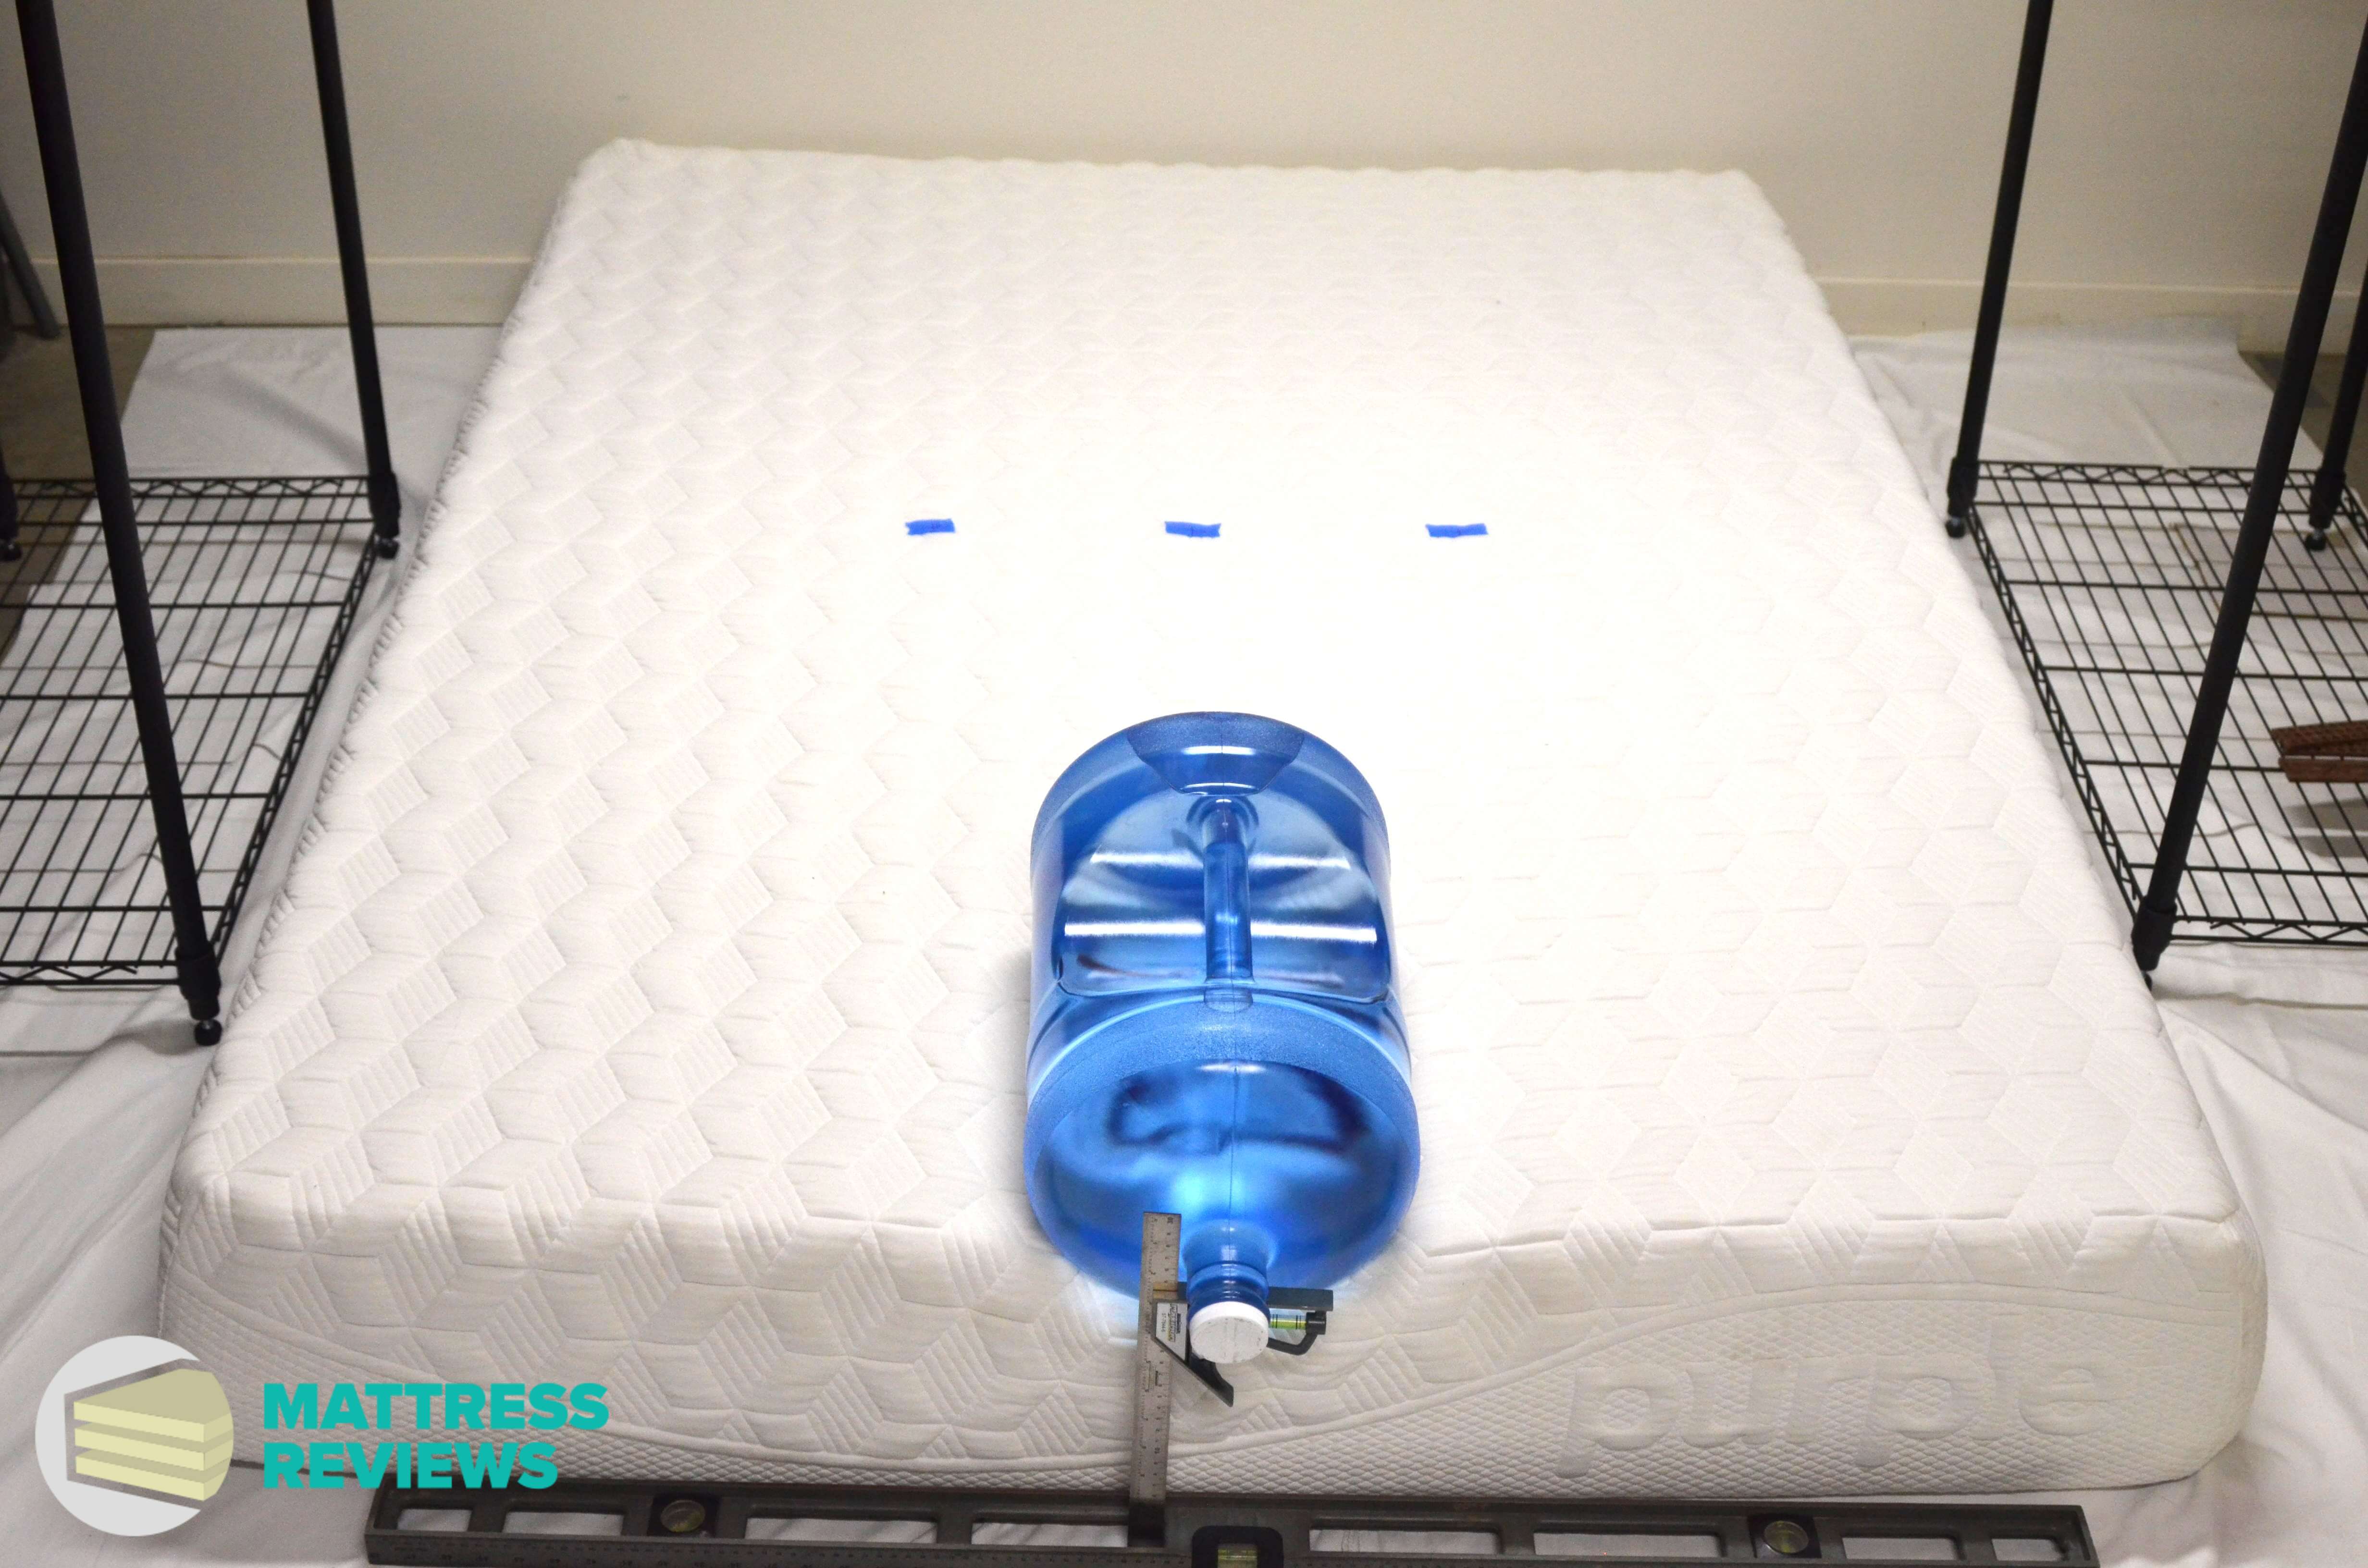 Image of the Purple mattress edge support test.